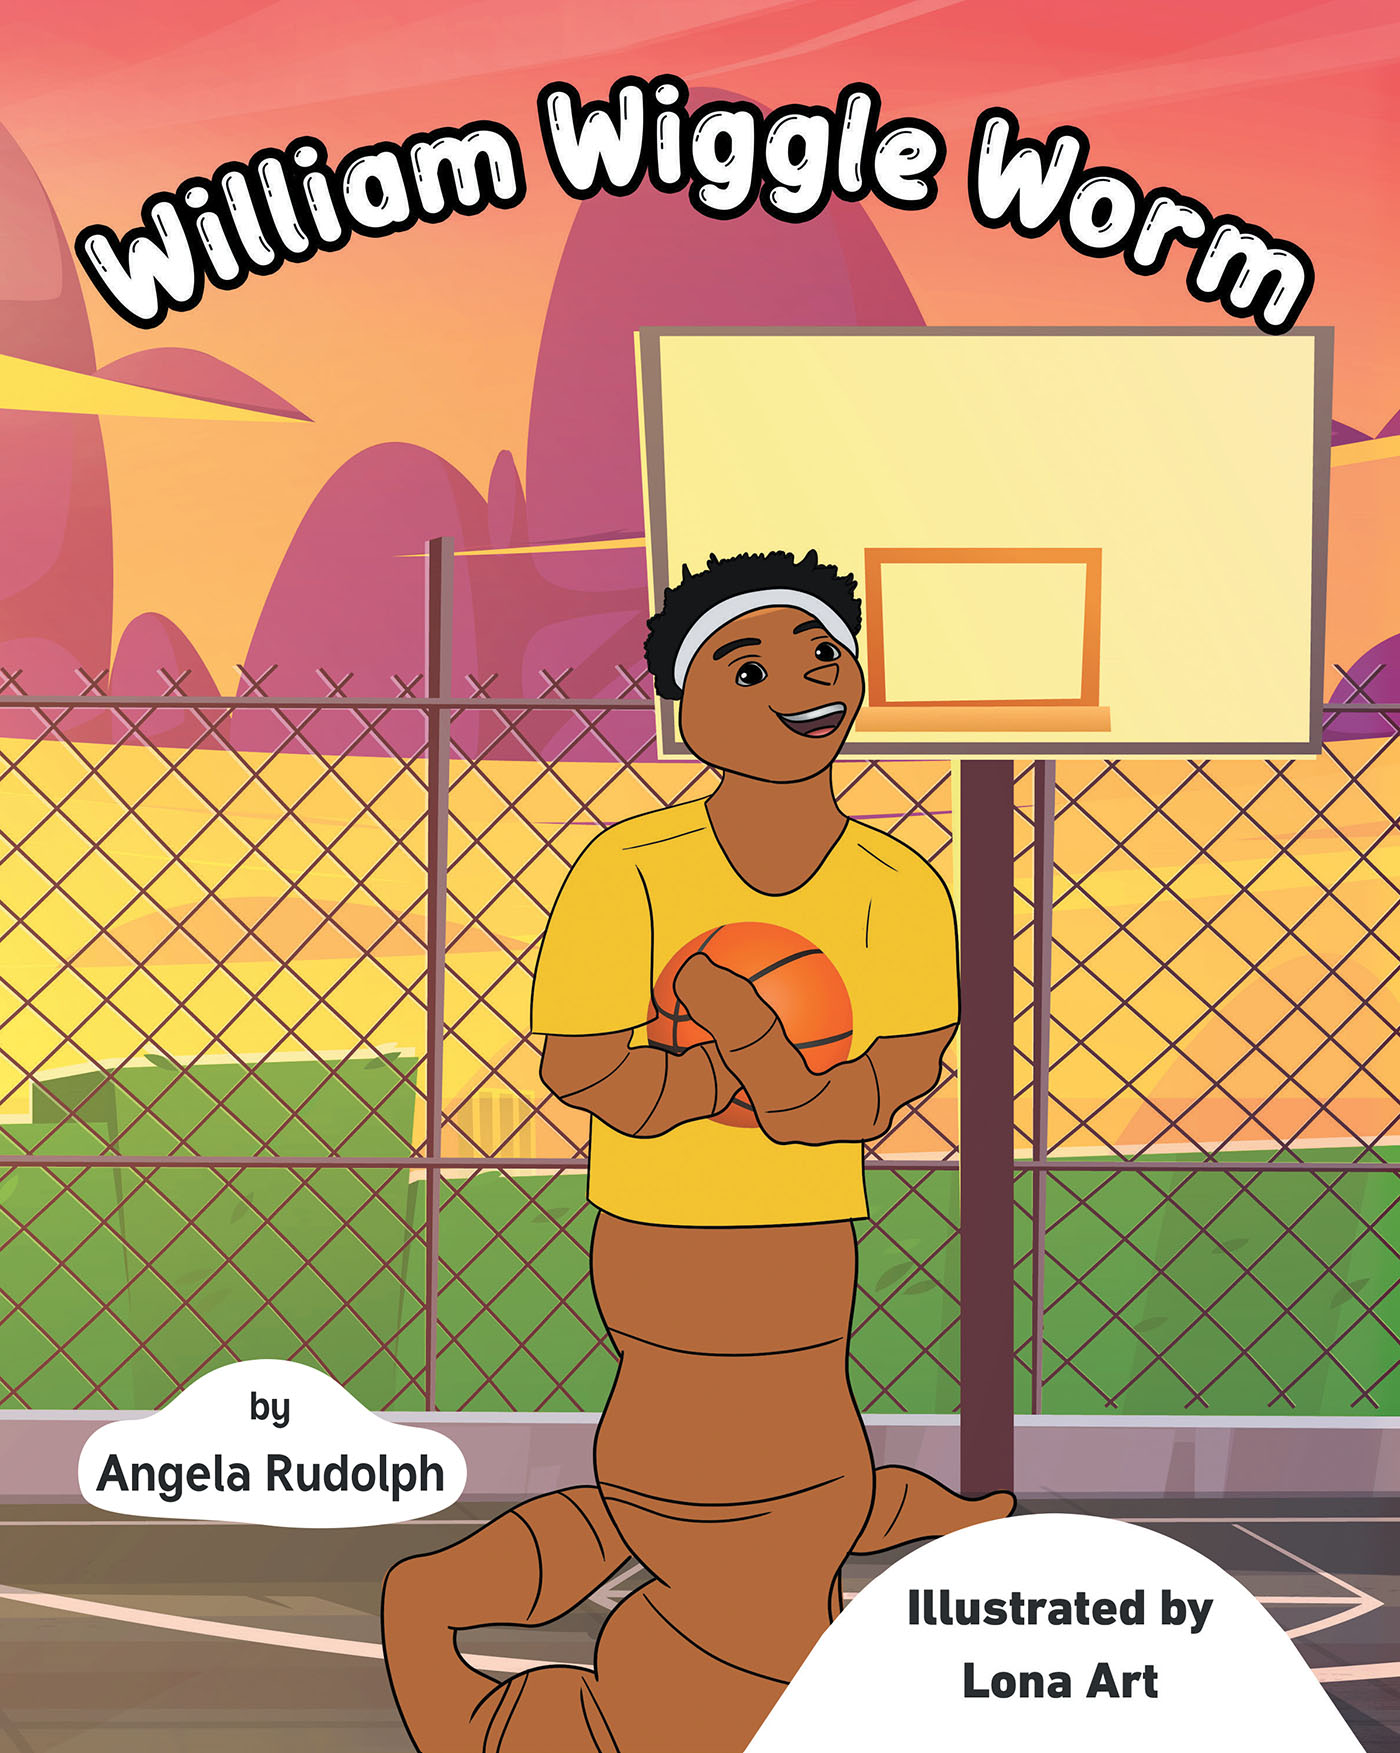 Author Angela Rudolph’s New Book, "William Wiggle Worm," is a Charming Rhyming Tale Offering Understanding and Strategies for Children Struggling with Excess Energy